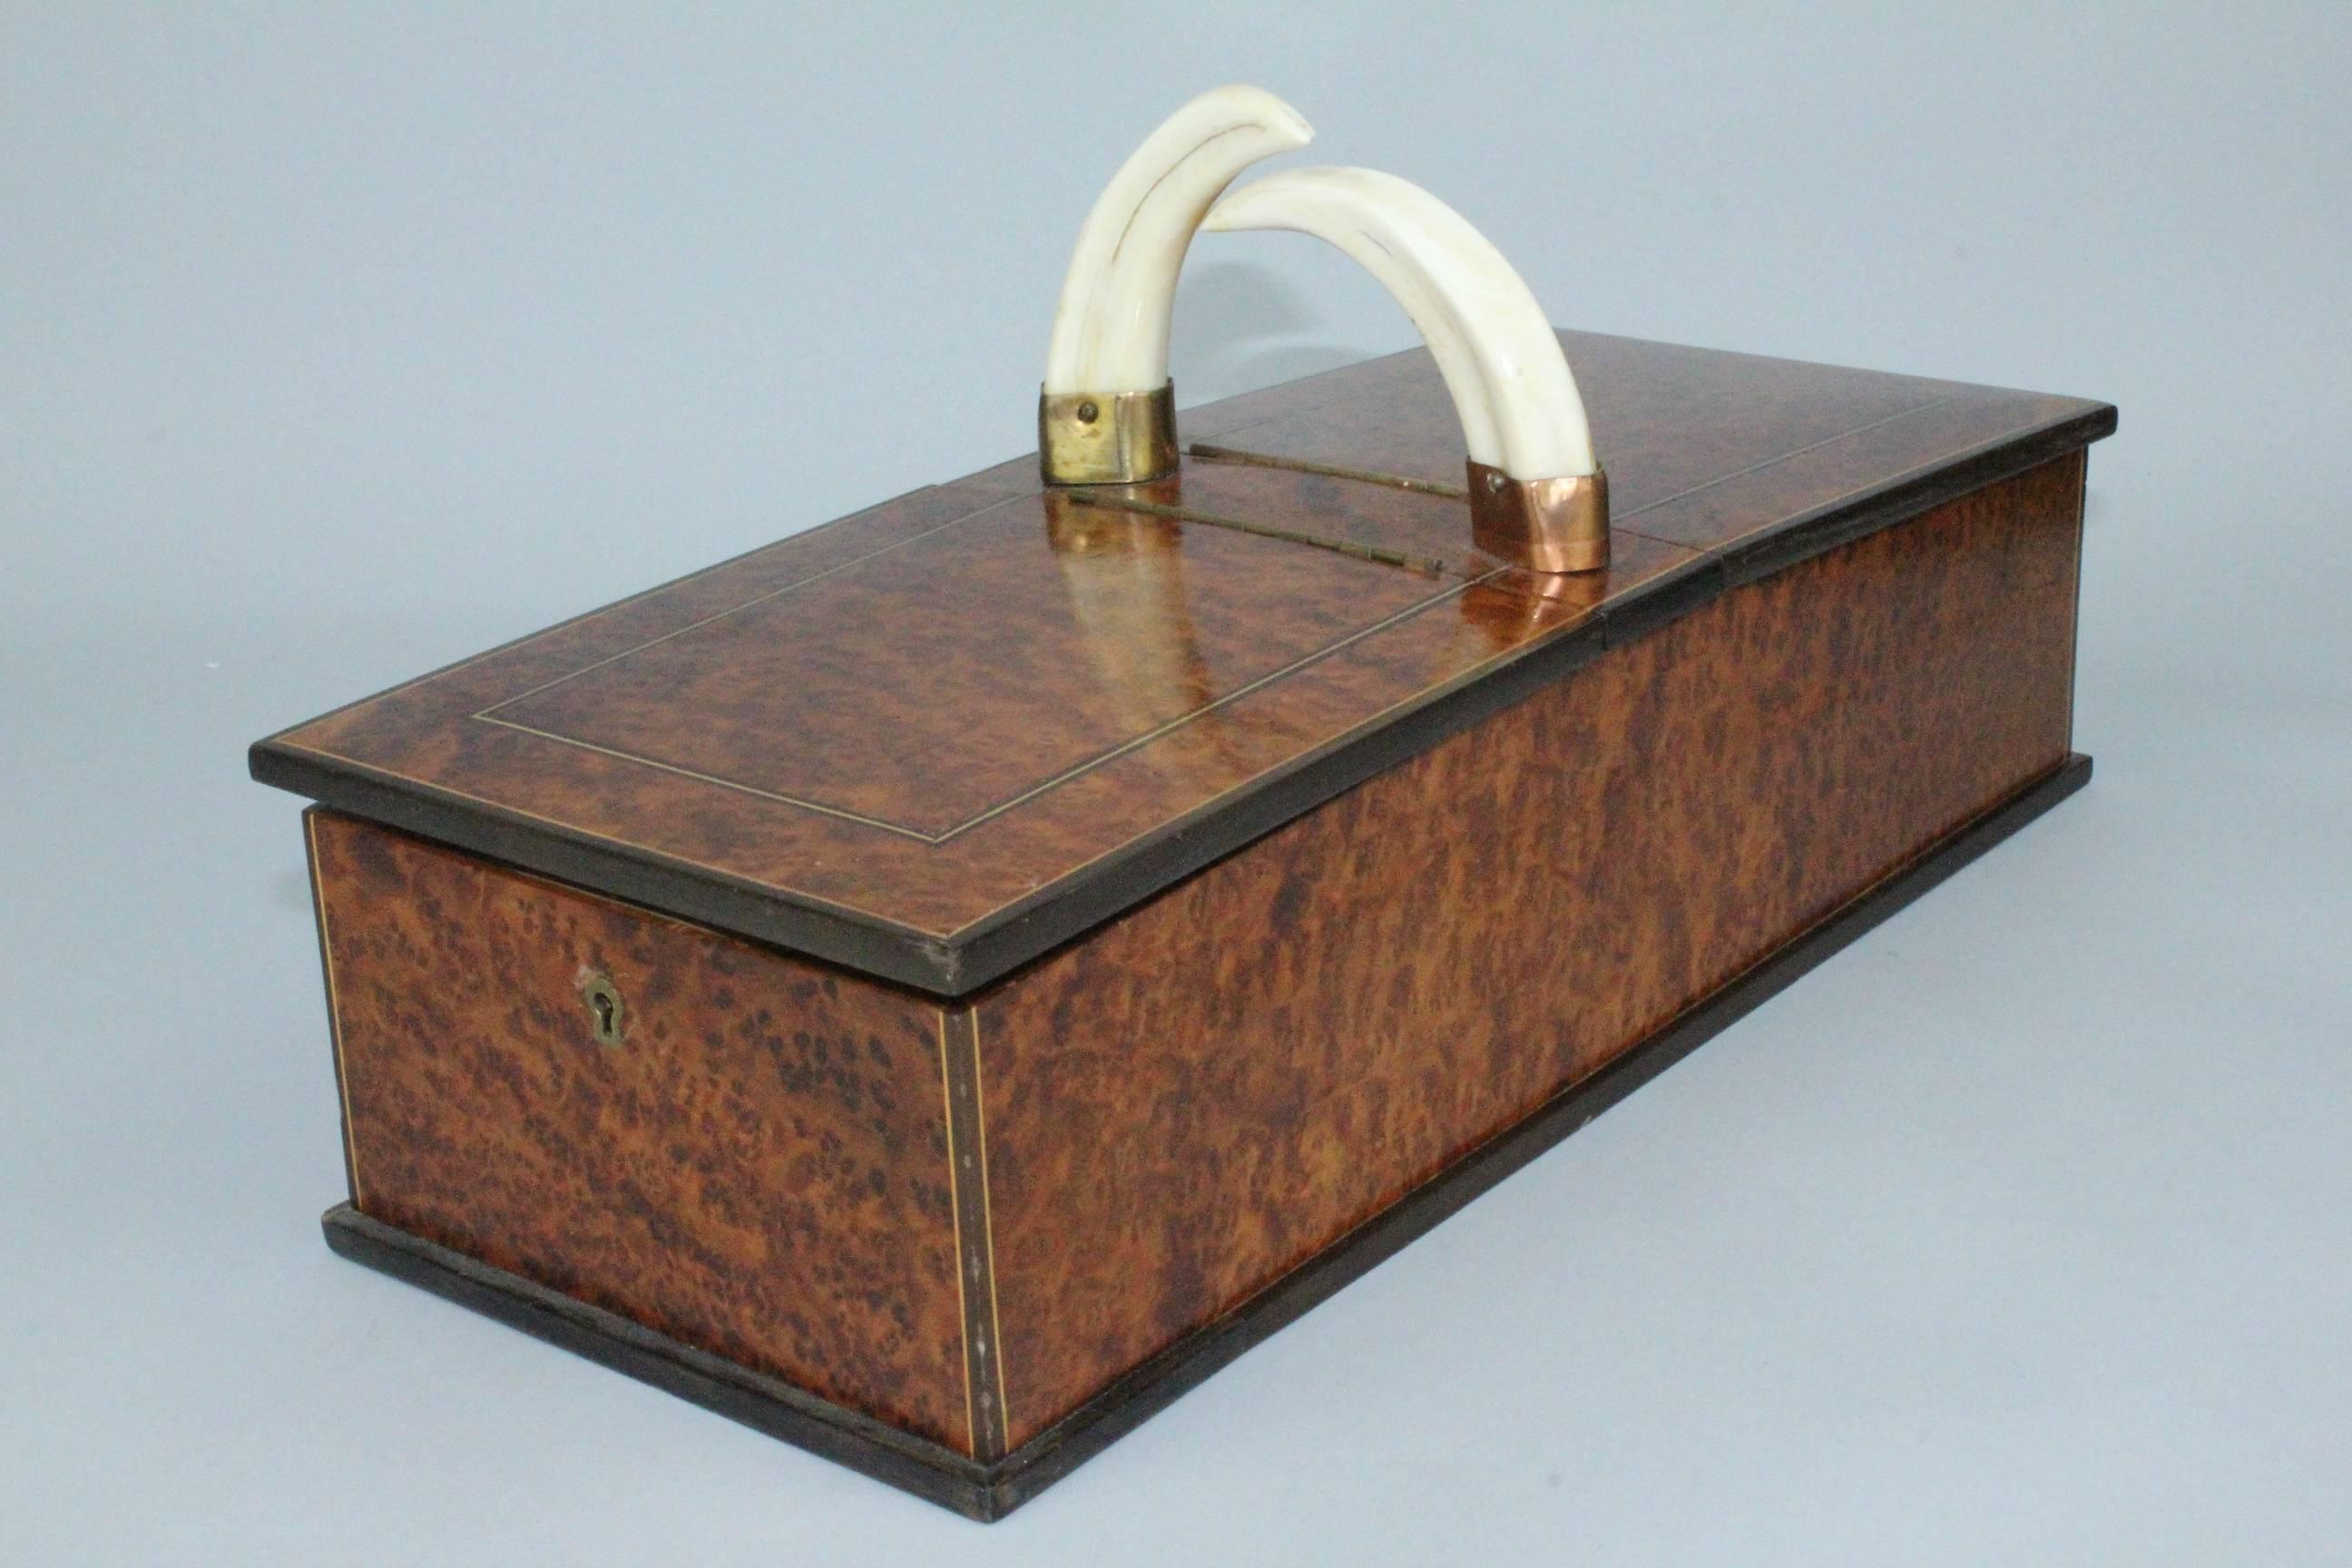 A 1920s amboyna burl and wild boar's tusks cigar/cigarette box. Beautiful golden amboyna with two brass-mounted wild boar's tusks. Very nice original condition with very minor restorations. With key.